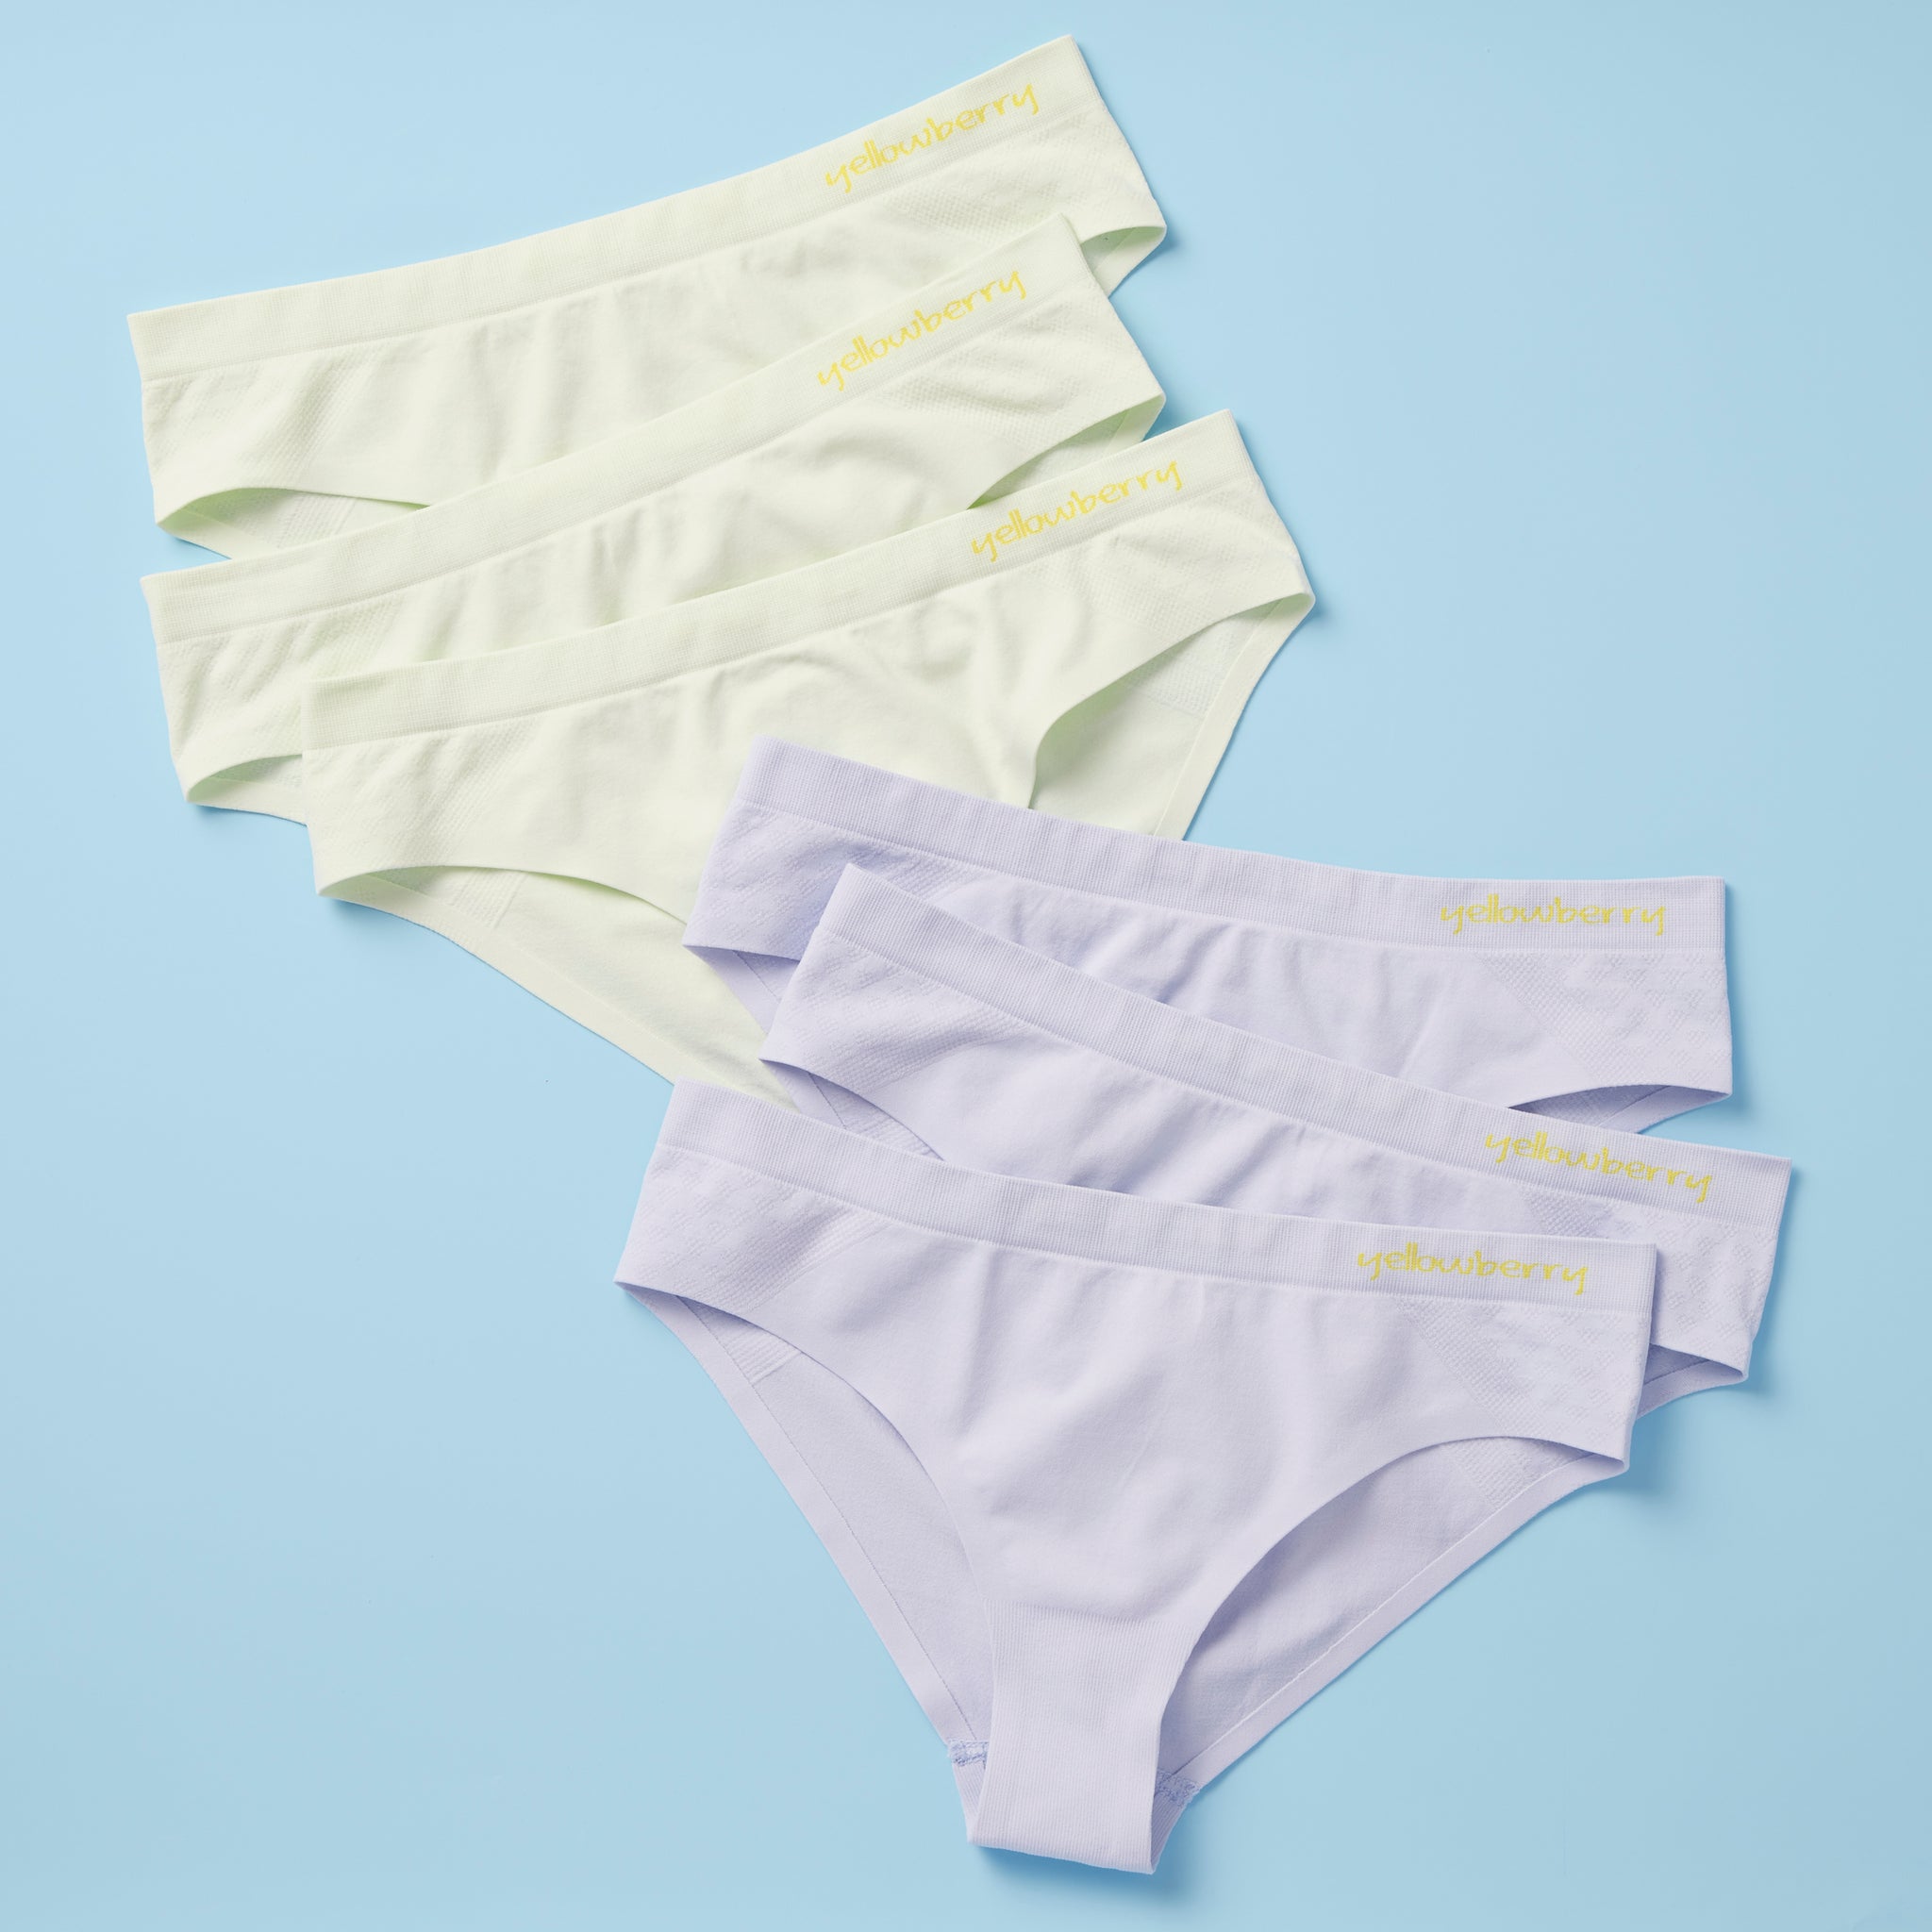 Is Seamless Underwear Breathable? - Yellowberry